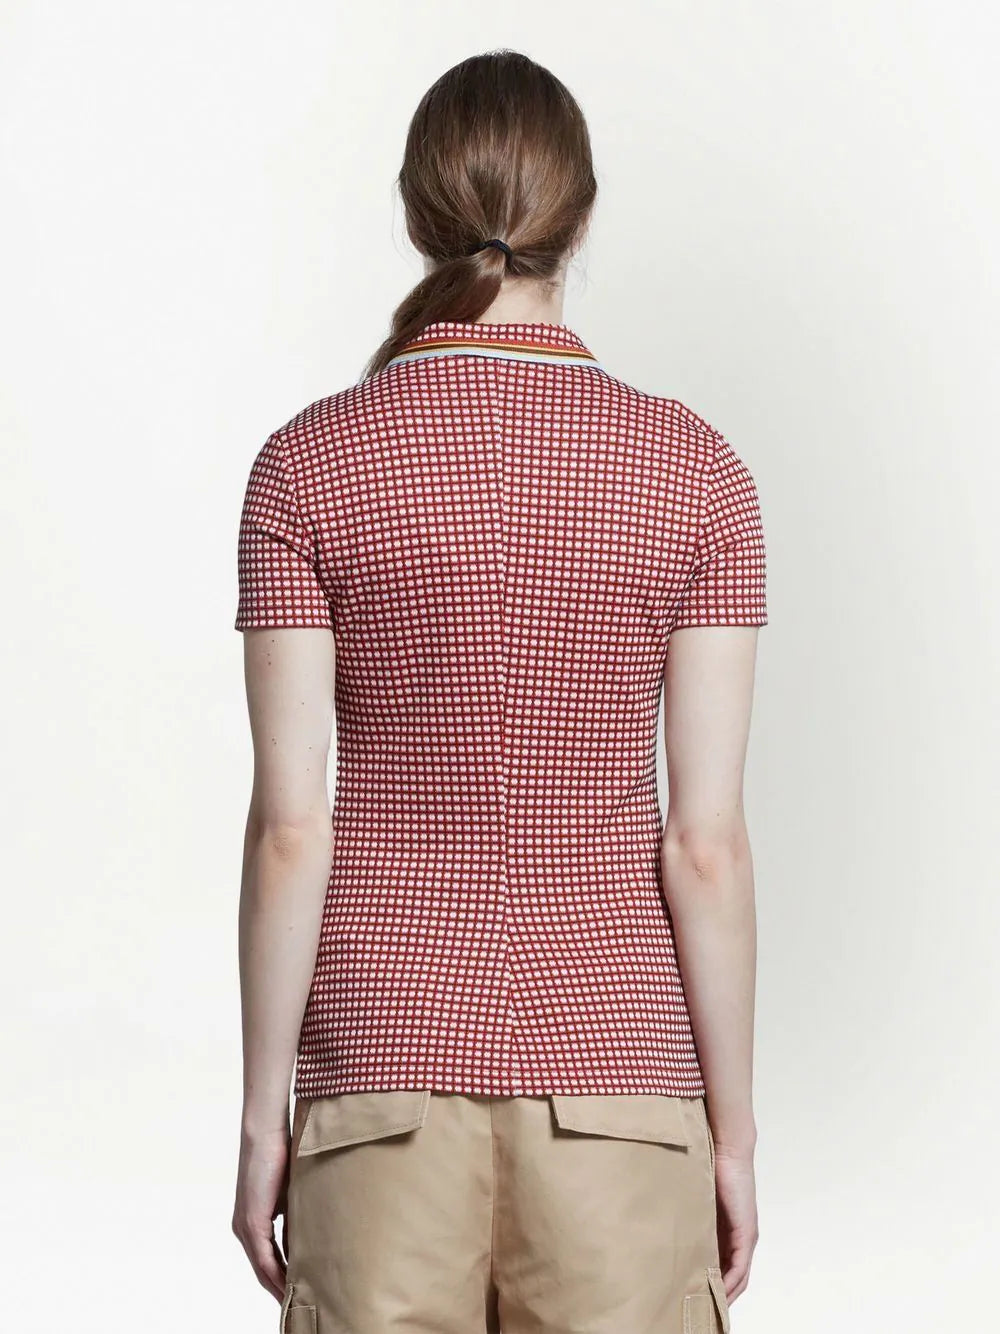 Marni Red Checkered Blouse